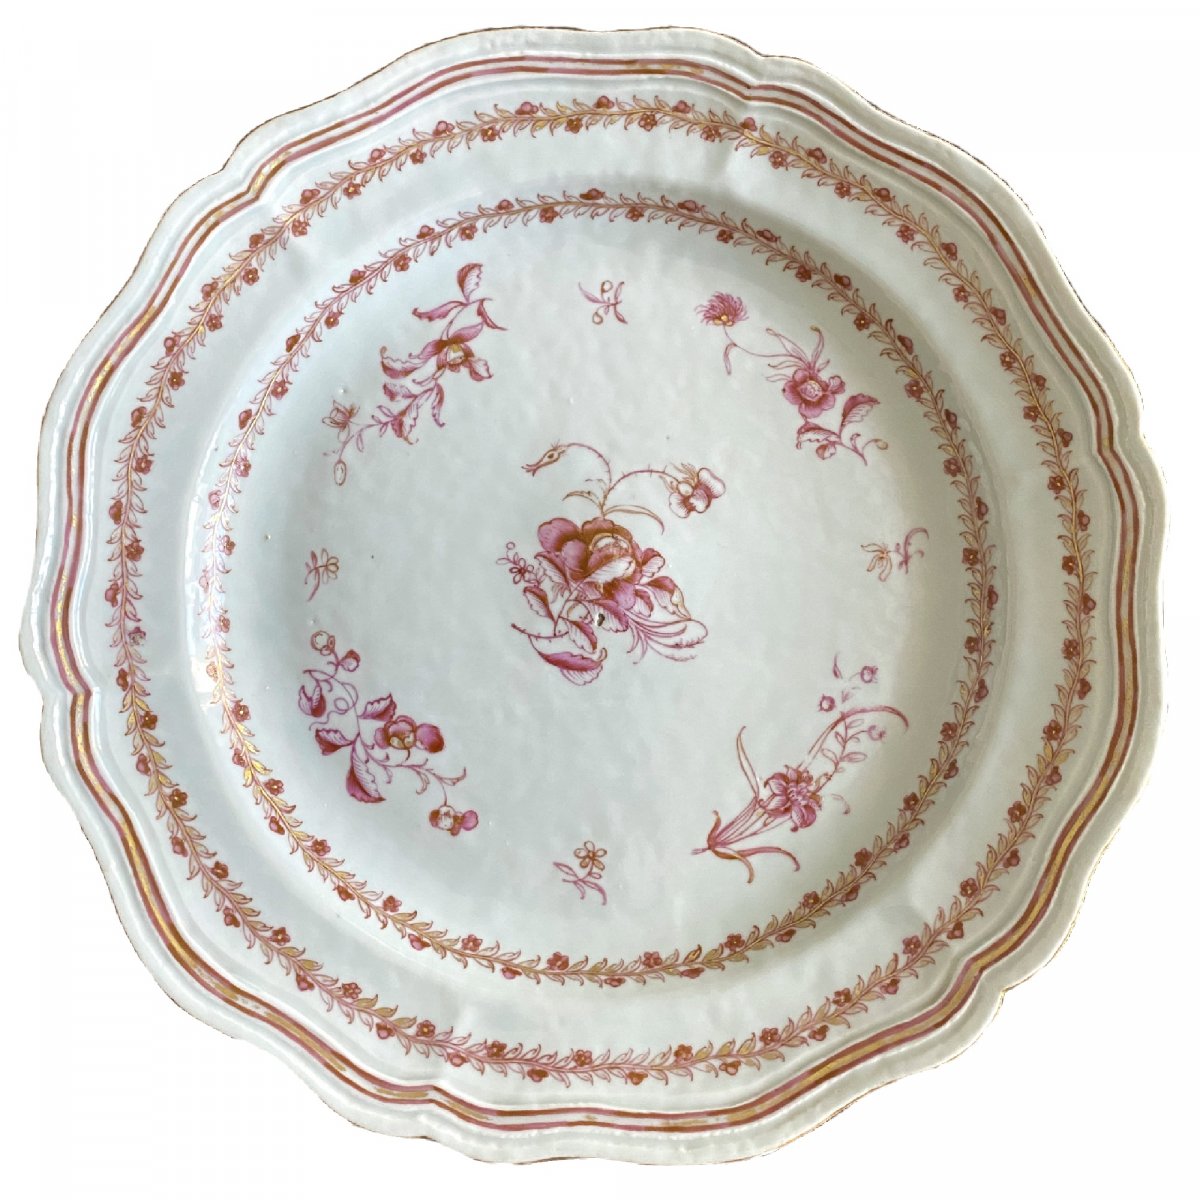 China, Large Famille Rose Chinese Export Porcelain Dish, Compagnie Des Indes, 18th Century